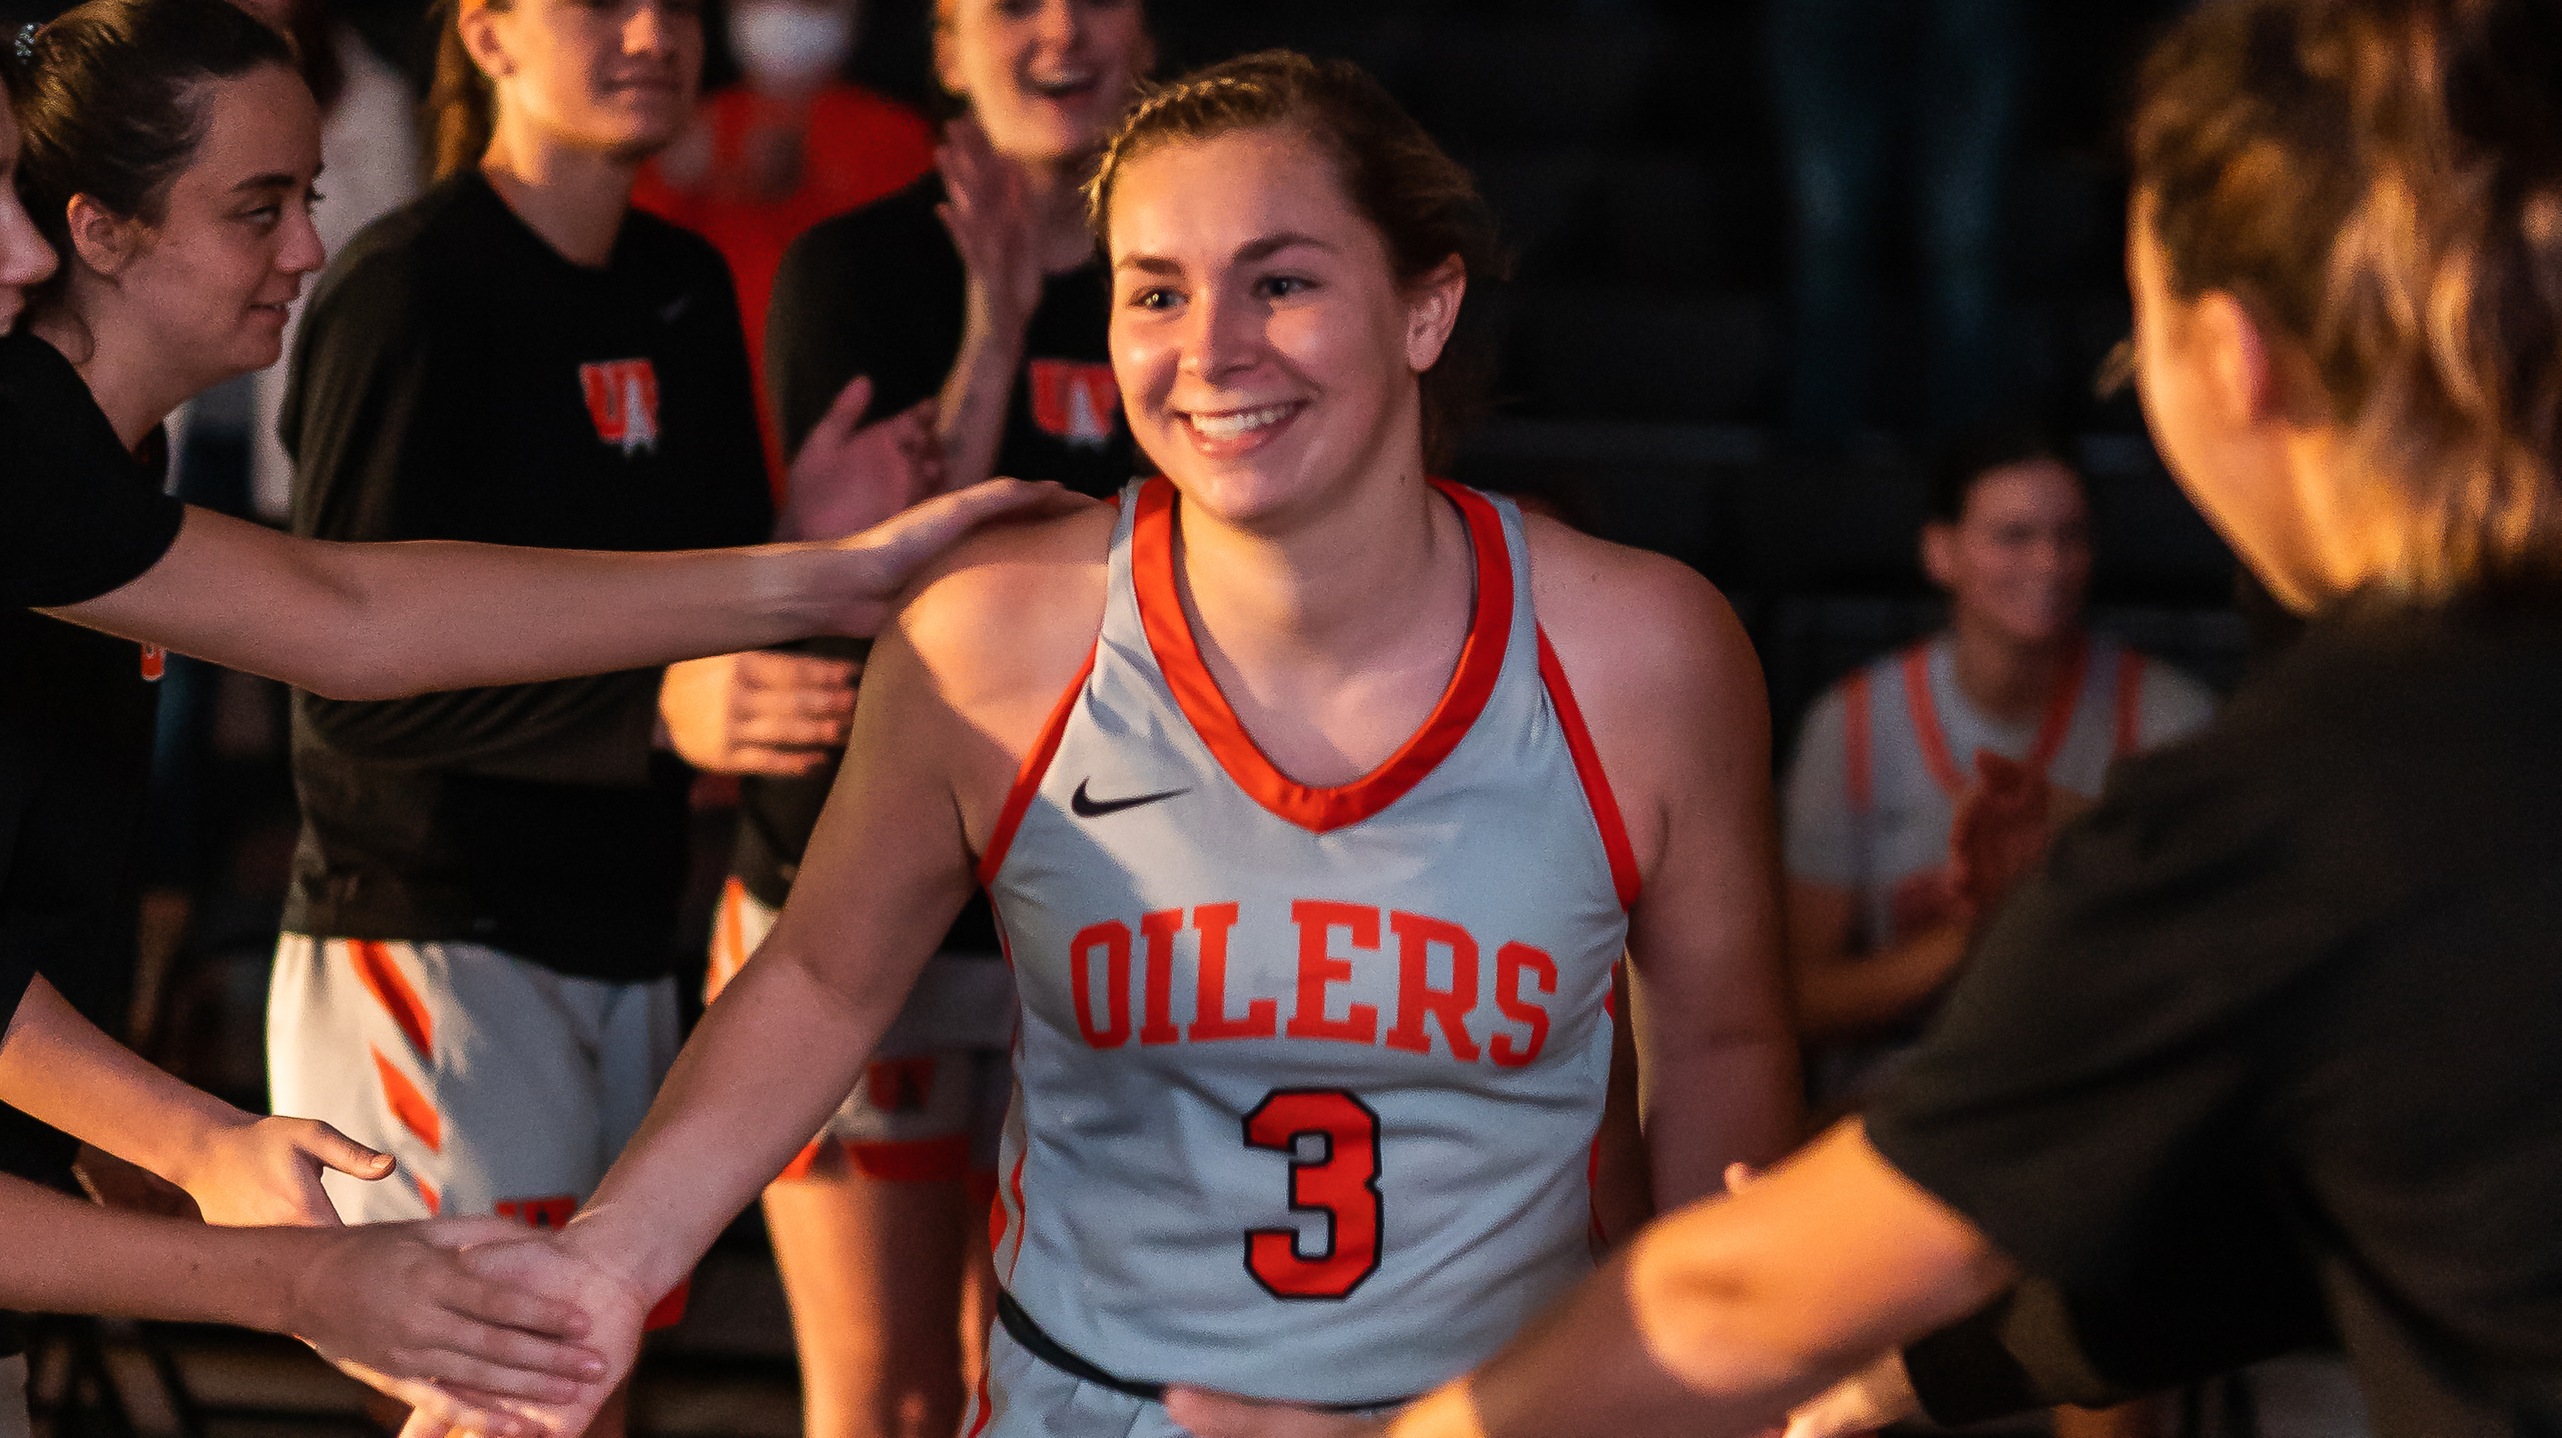 Oilers Look to Continue Streak at Walsh | Home vs Malone